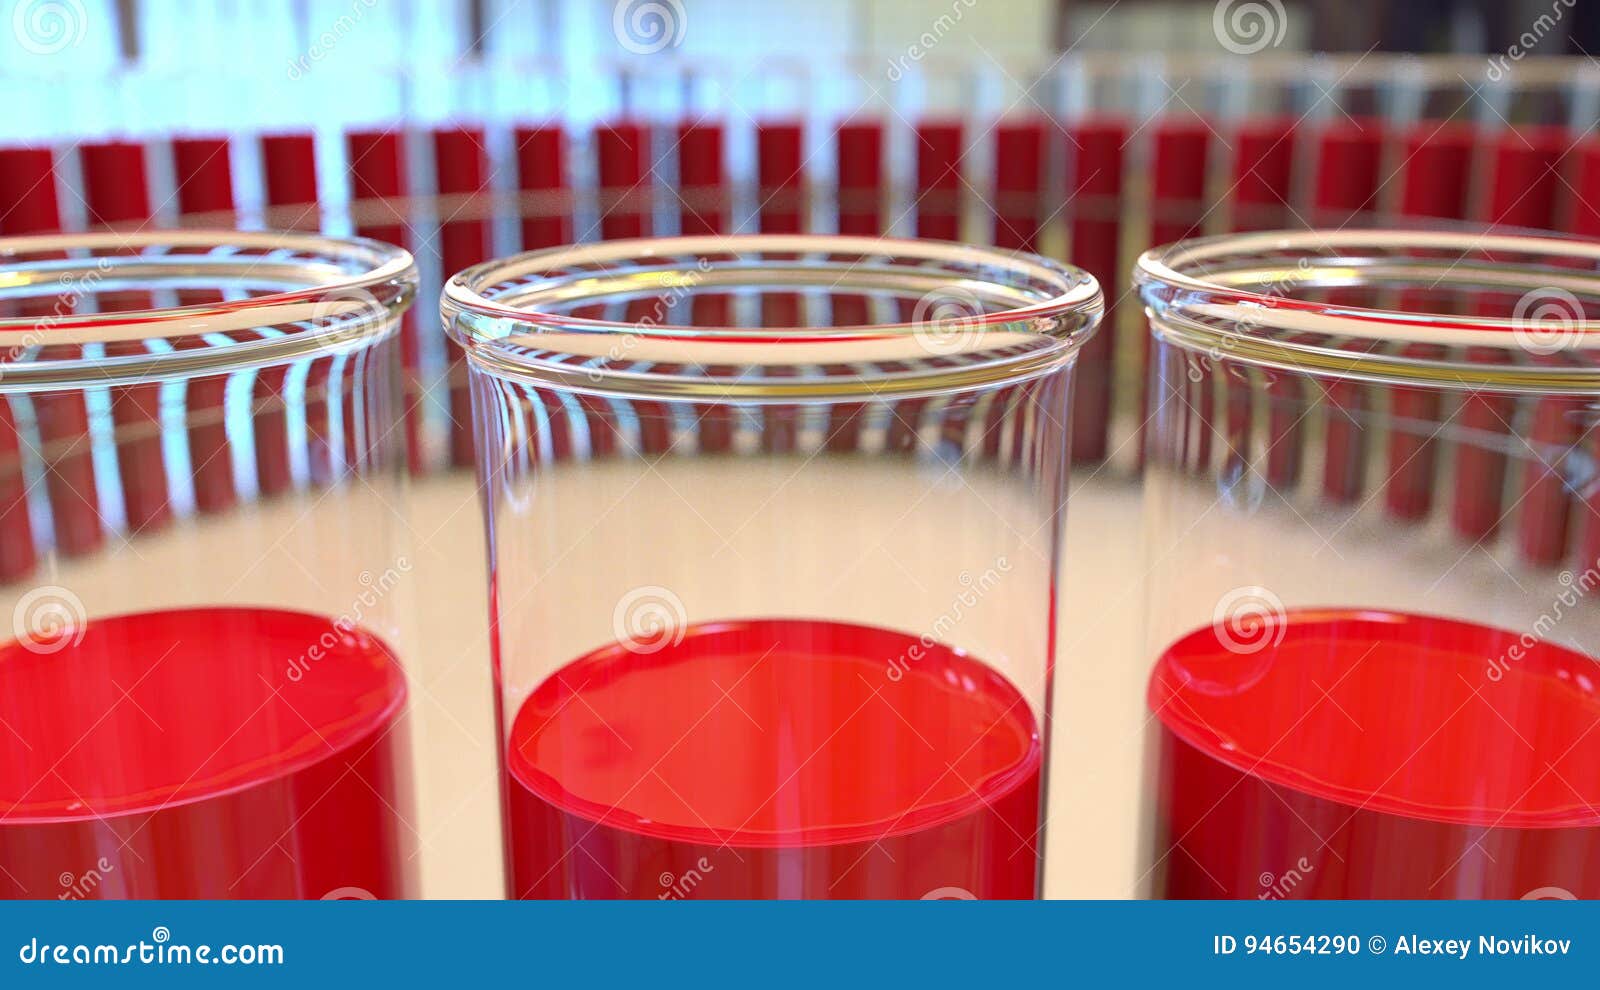 Ring of Glass Vials with Blood or Red Liquid. Chemical or Medical